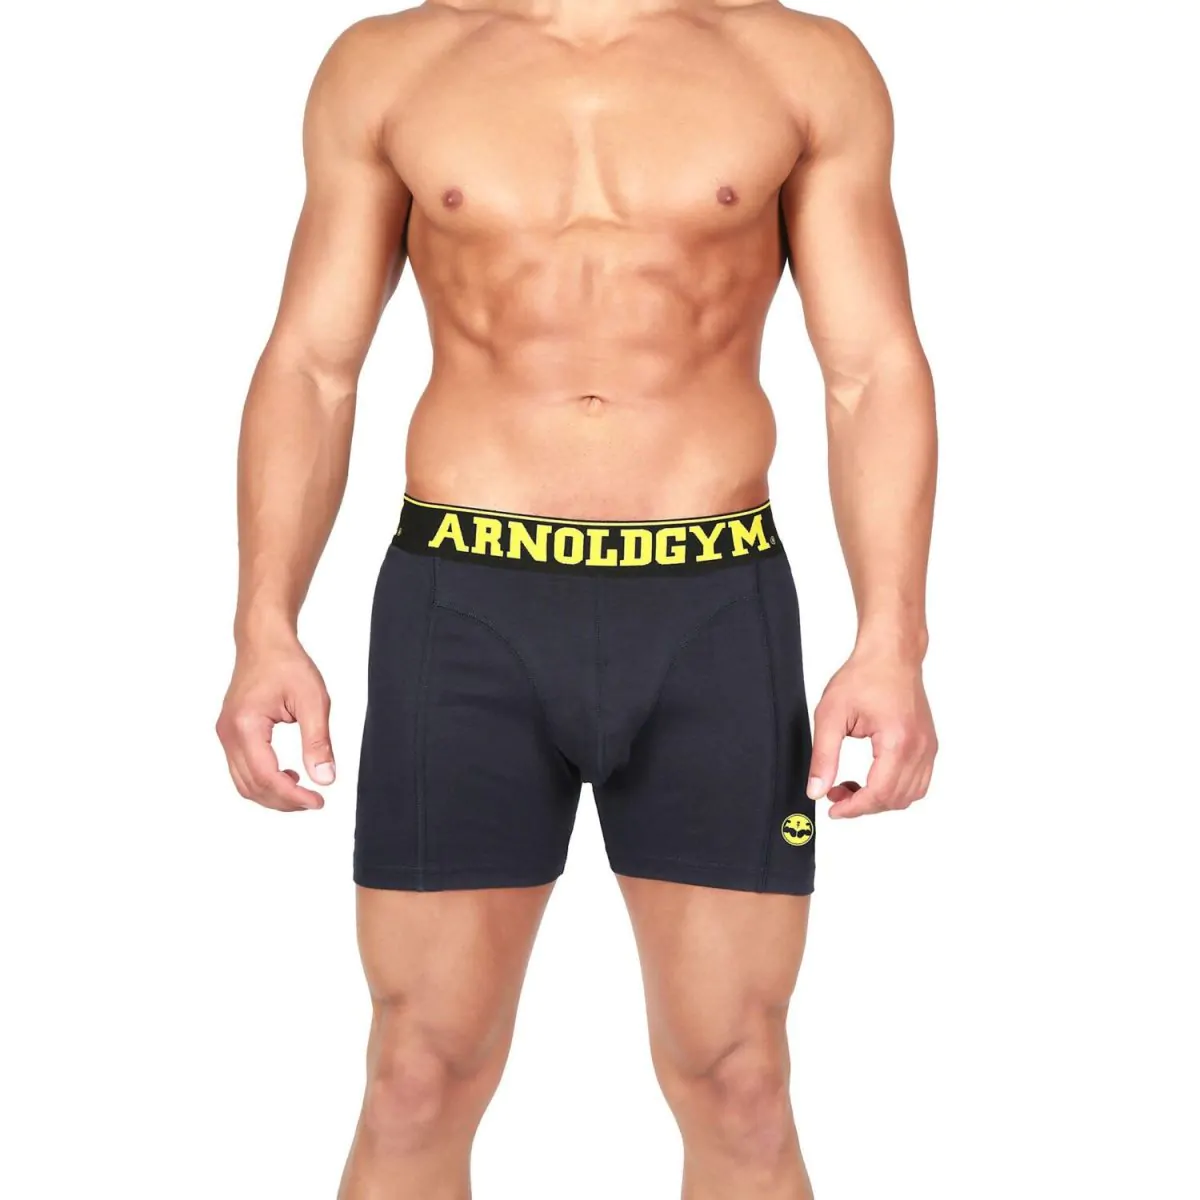 0000447 arnold gym olympic series navy boxers 2 pack